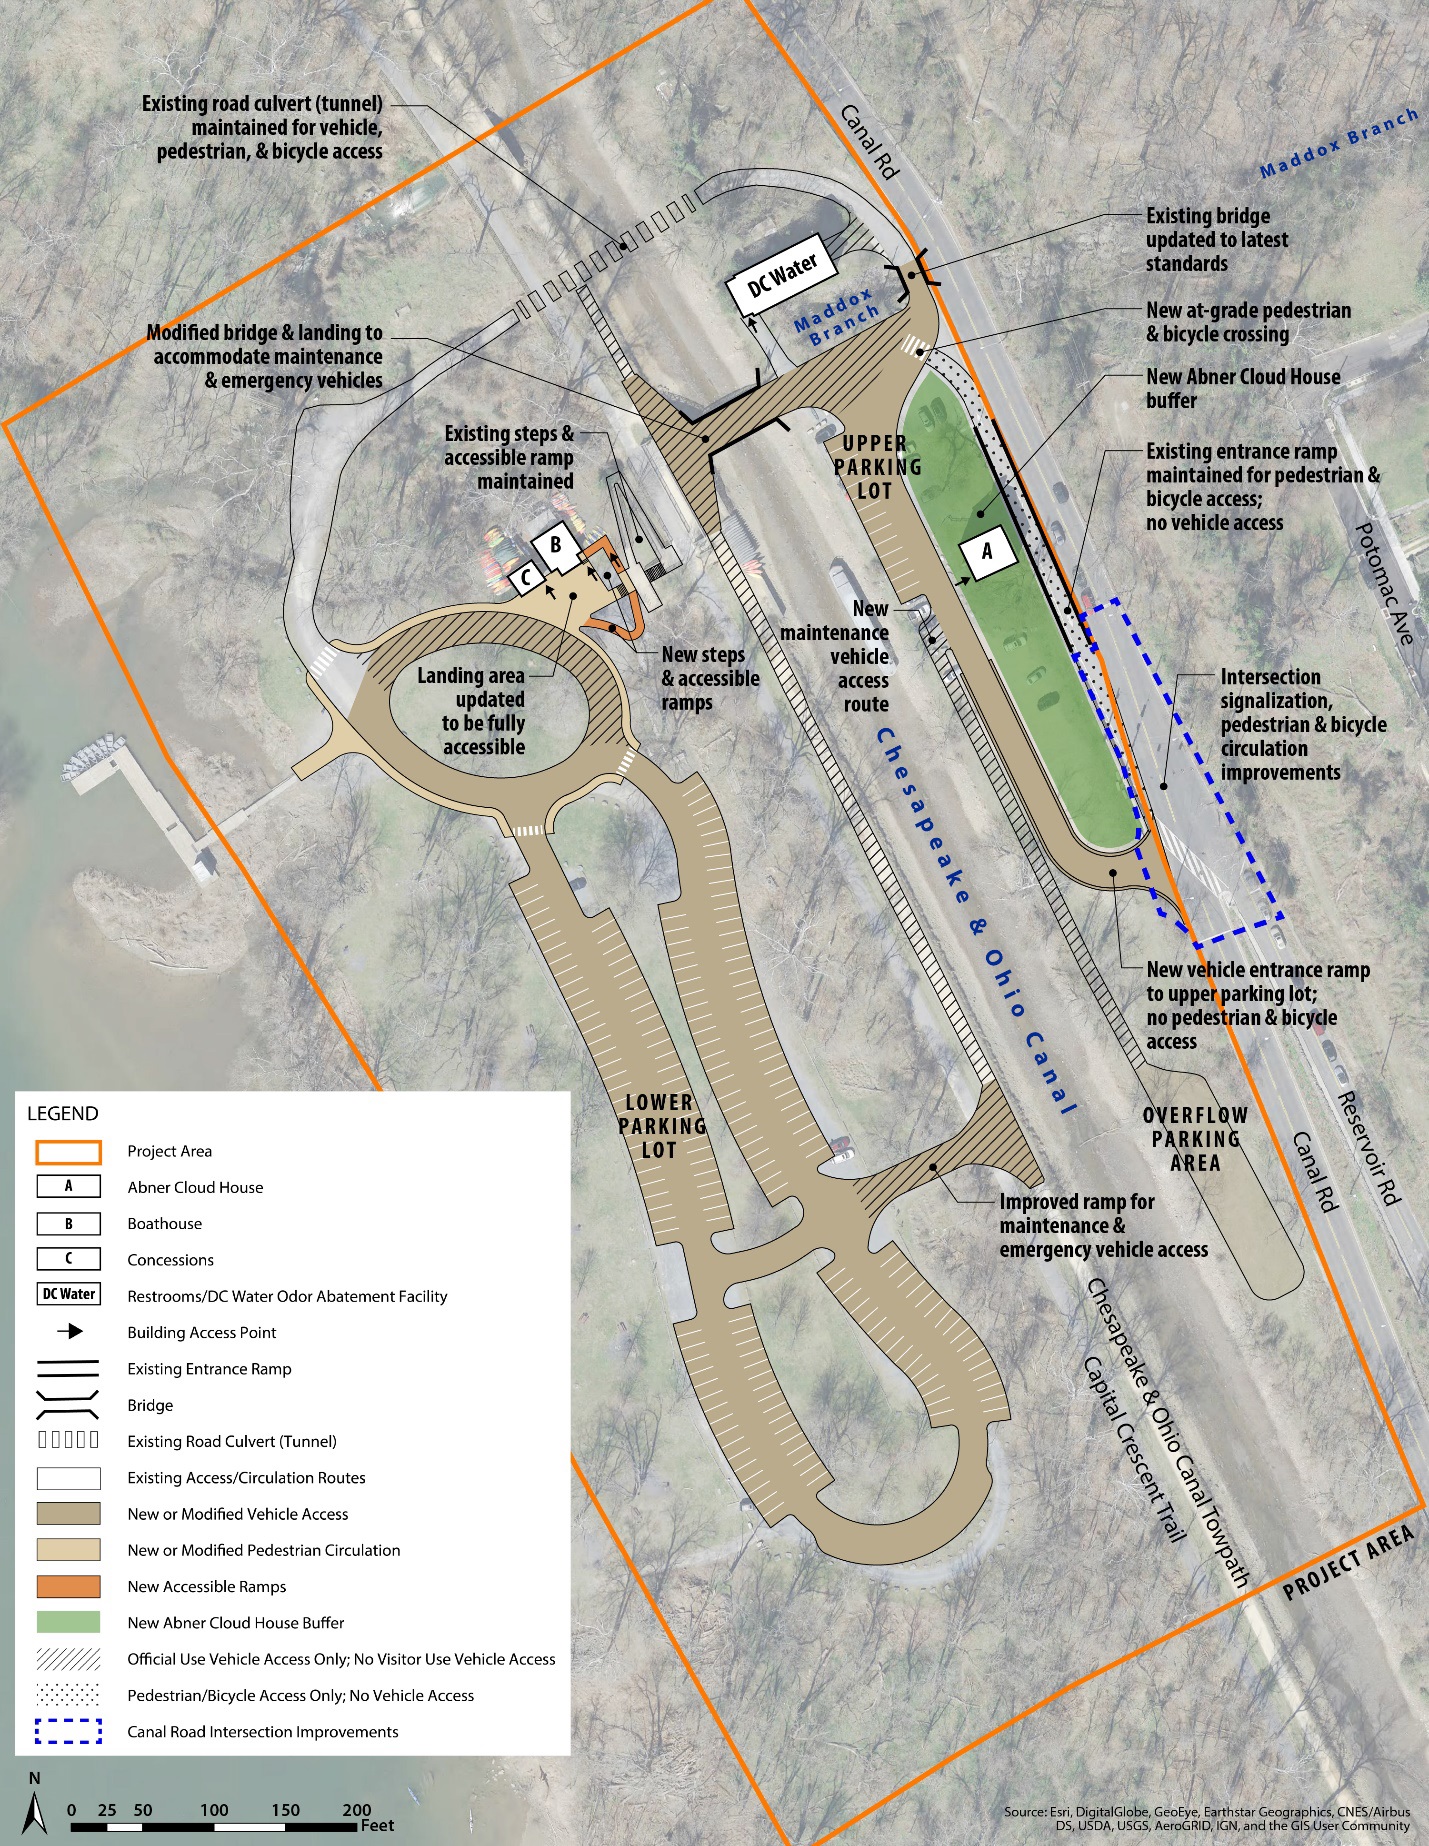 Diagram of Fletcher's Cove area showing plans to add a new vehicle entrance and reconfigure the existing entrance.